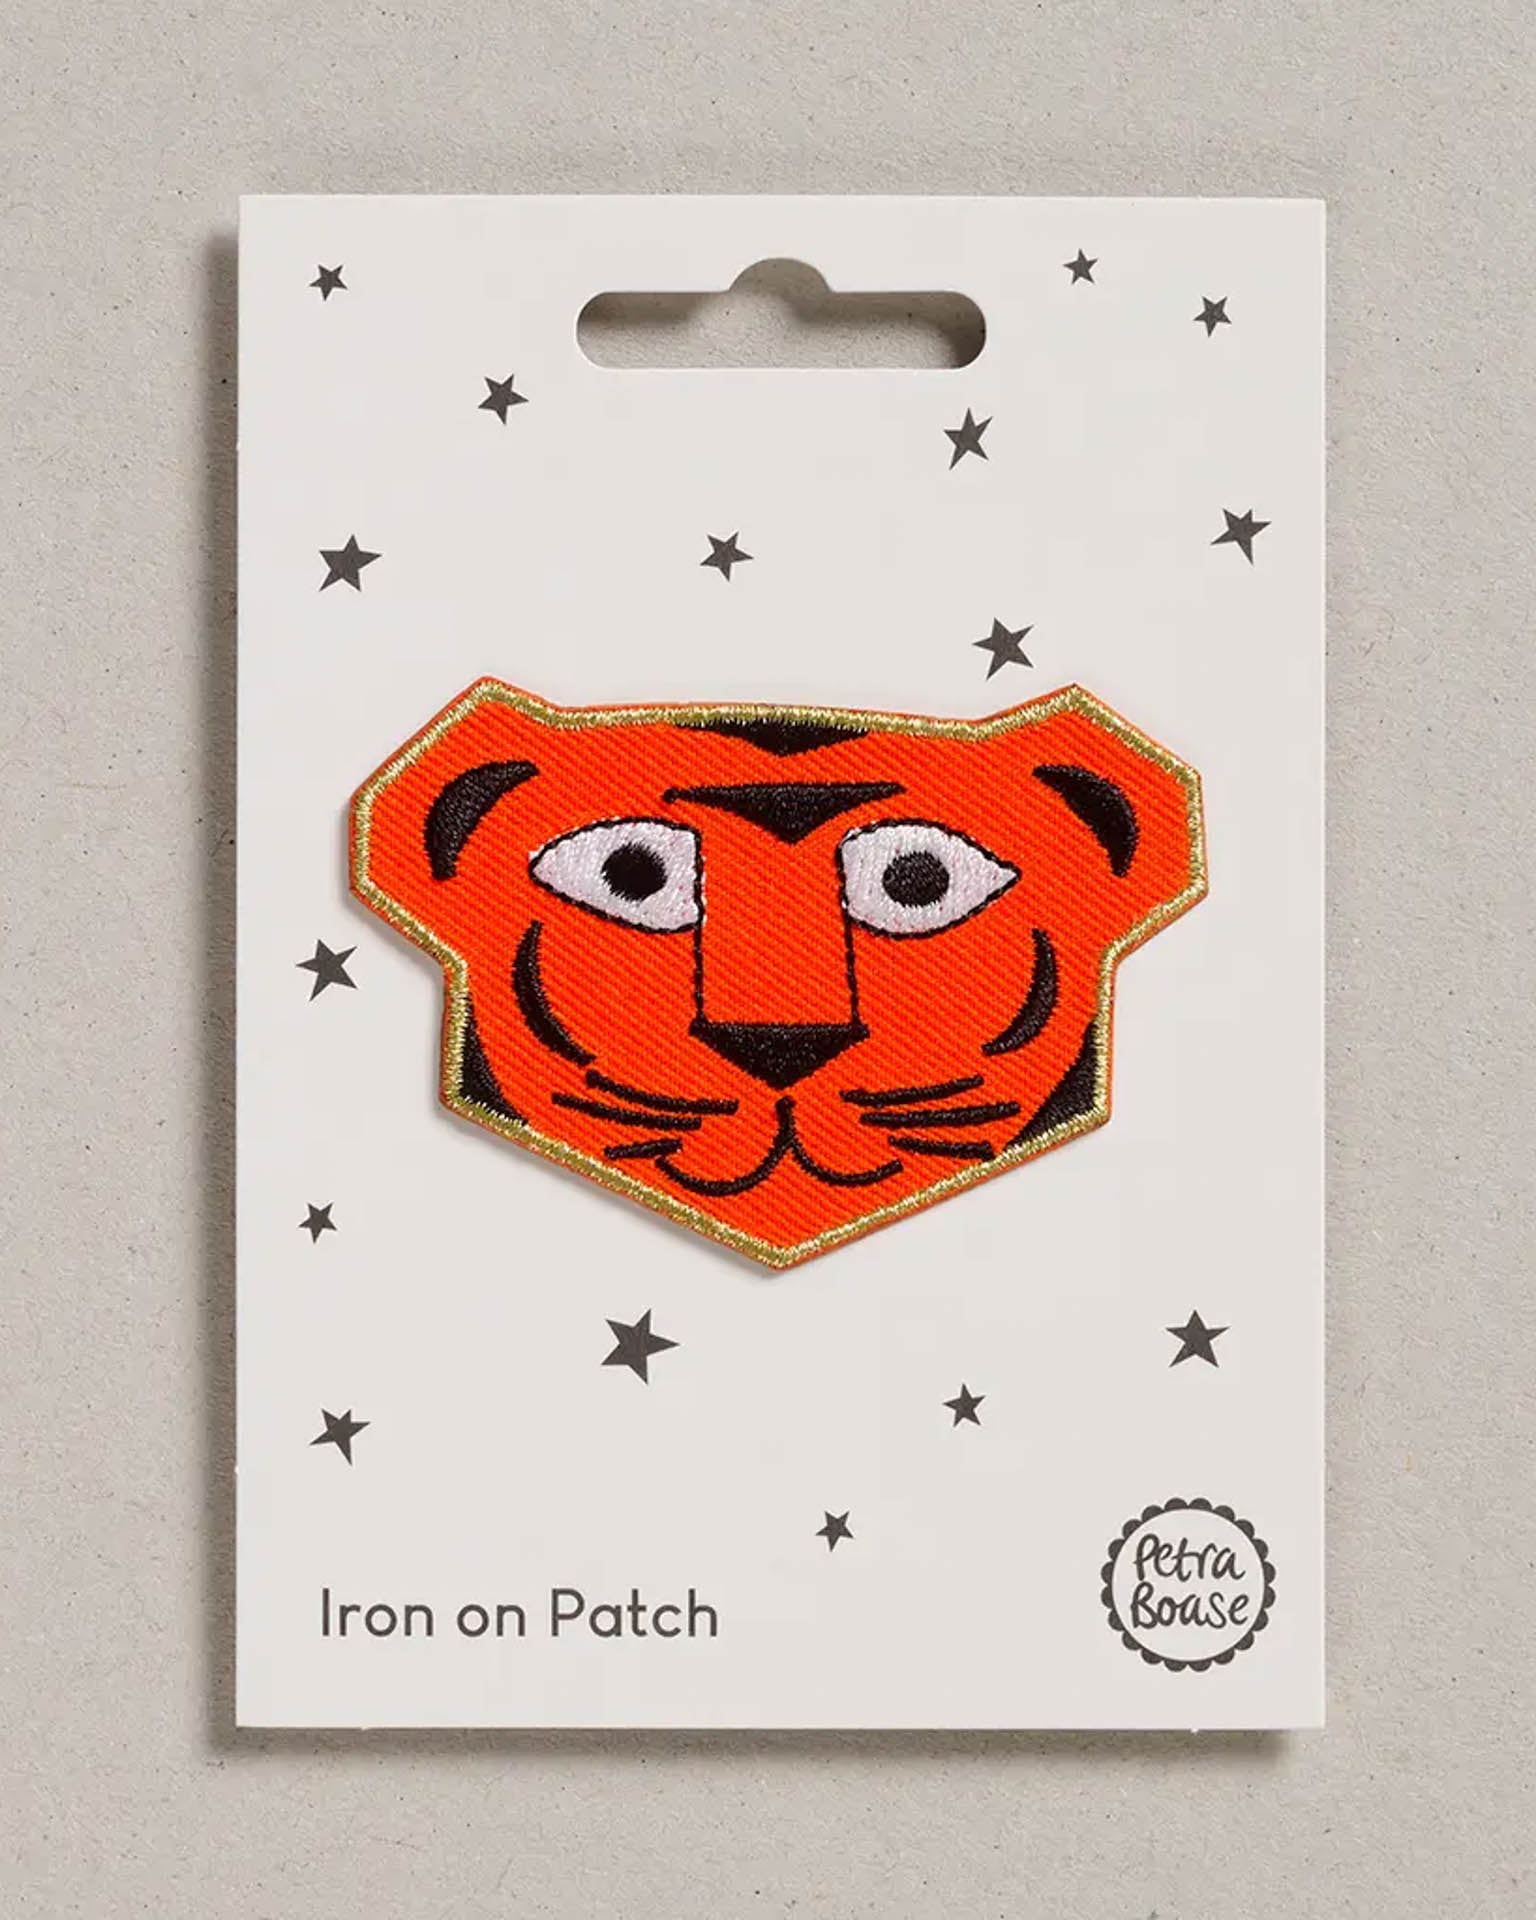 Little petra boase accessories tiger iron on patch